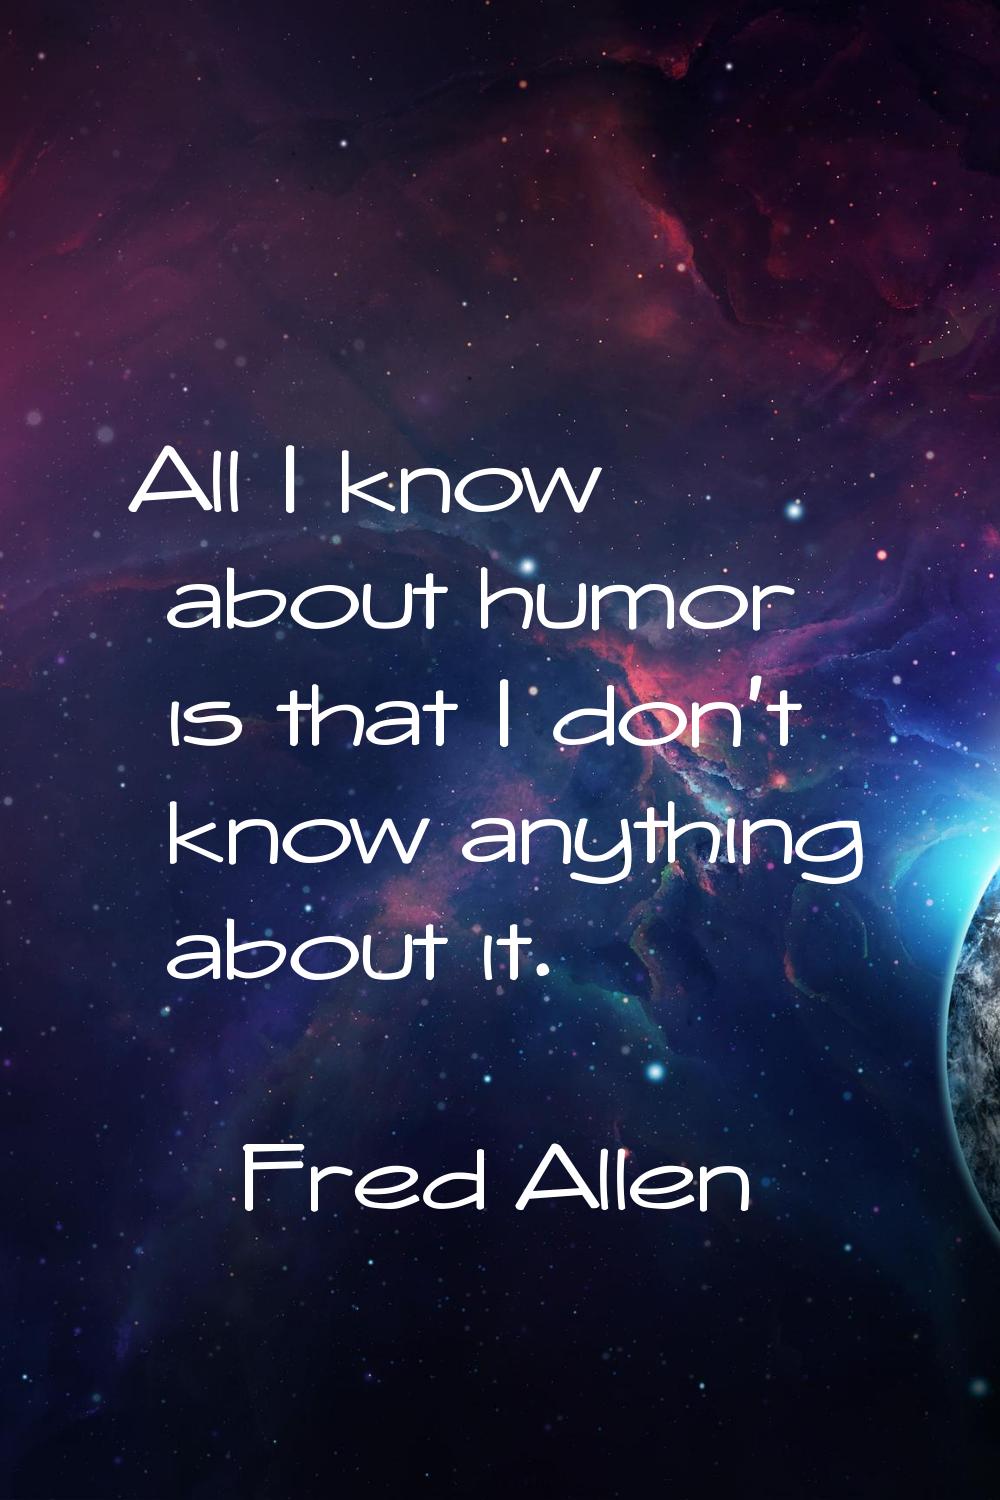 All I know about humor is that I don't know anything about it.